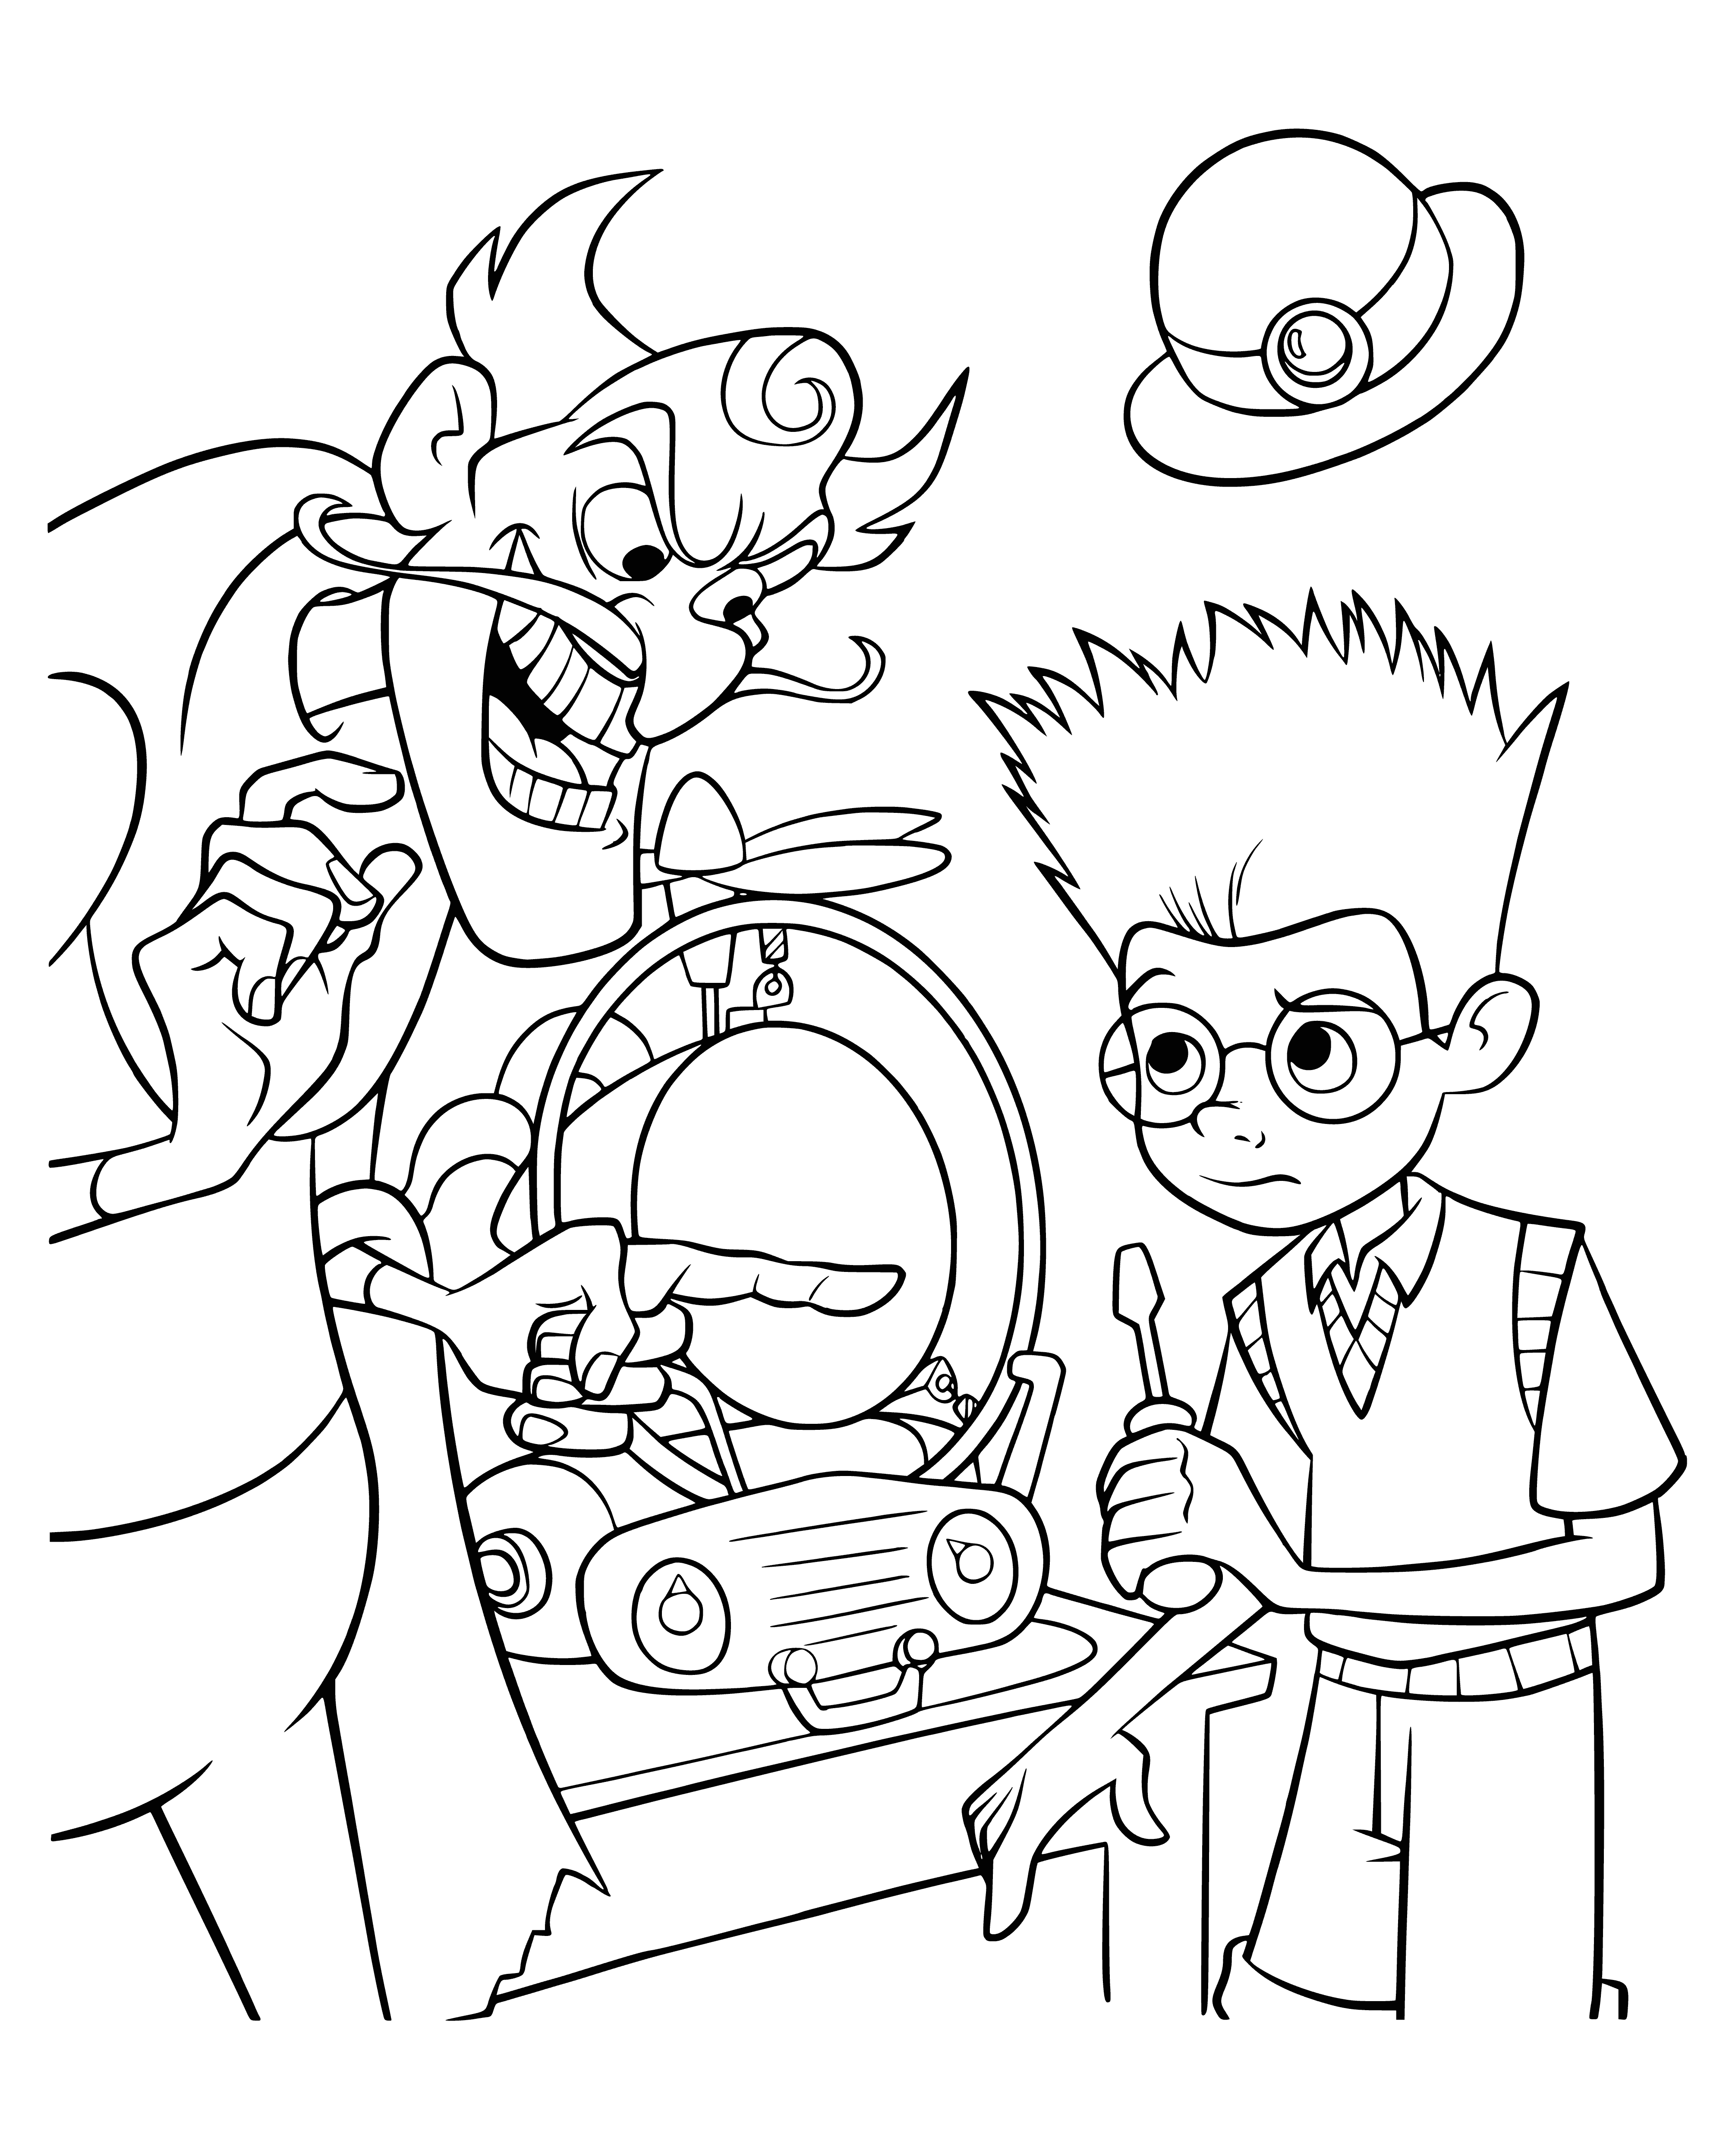 coloring page: Robinson villain is a menacing figure, intimidating Lewis with a curved blade, dark complexion, and hooded eyes.